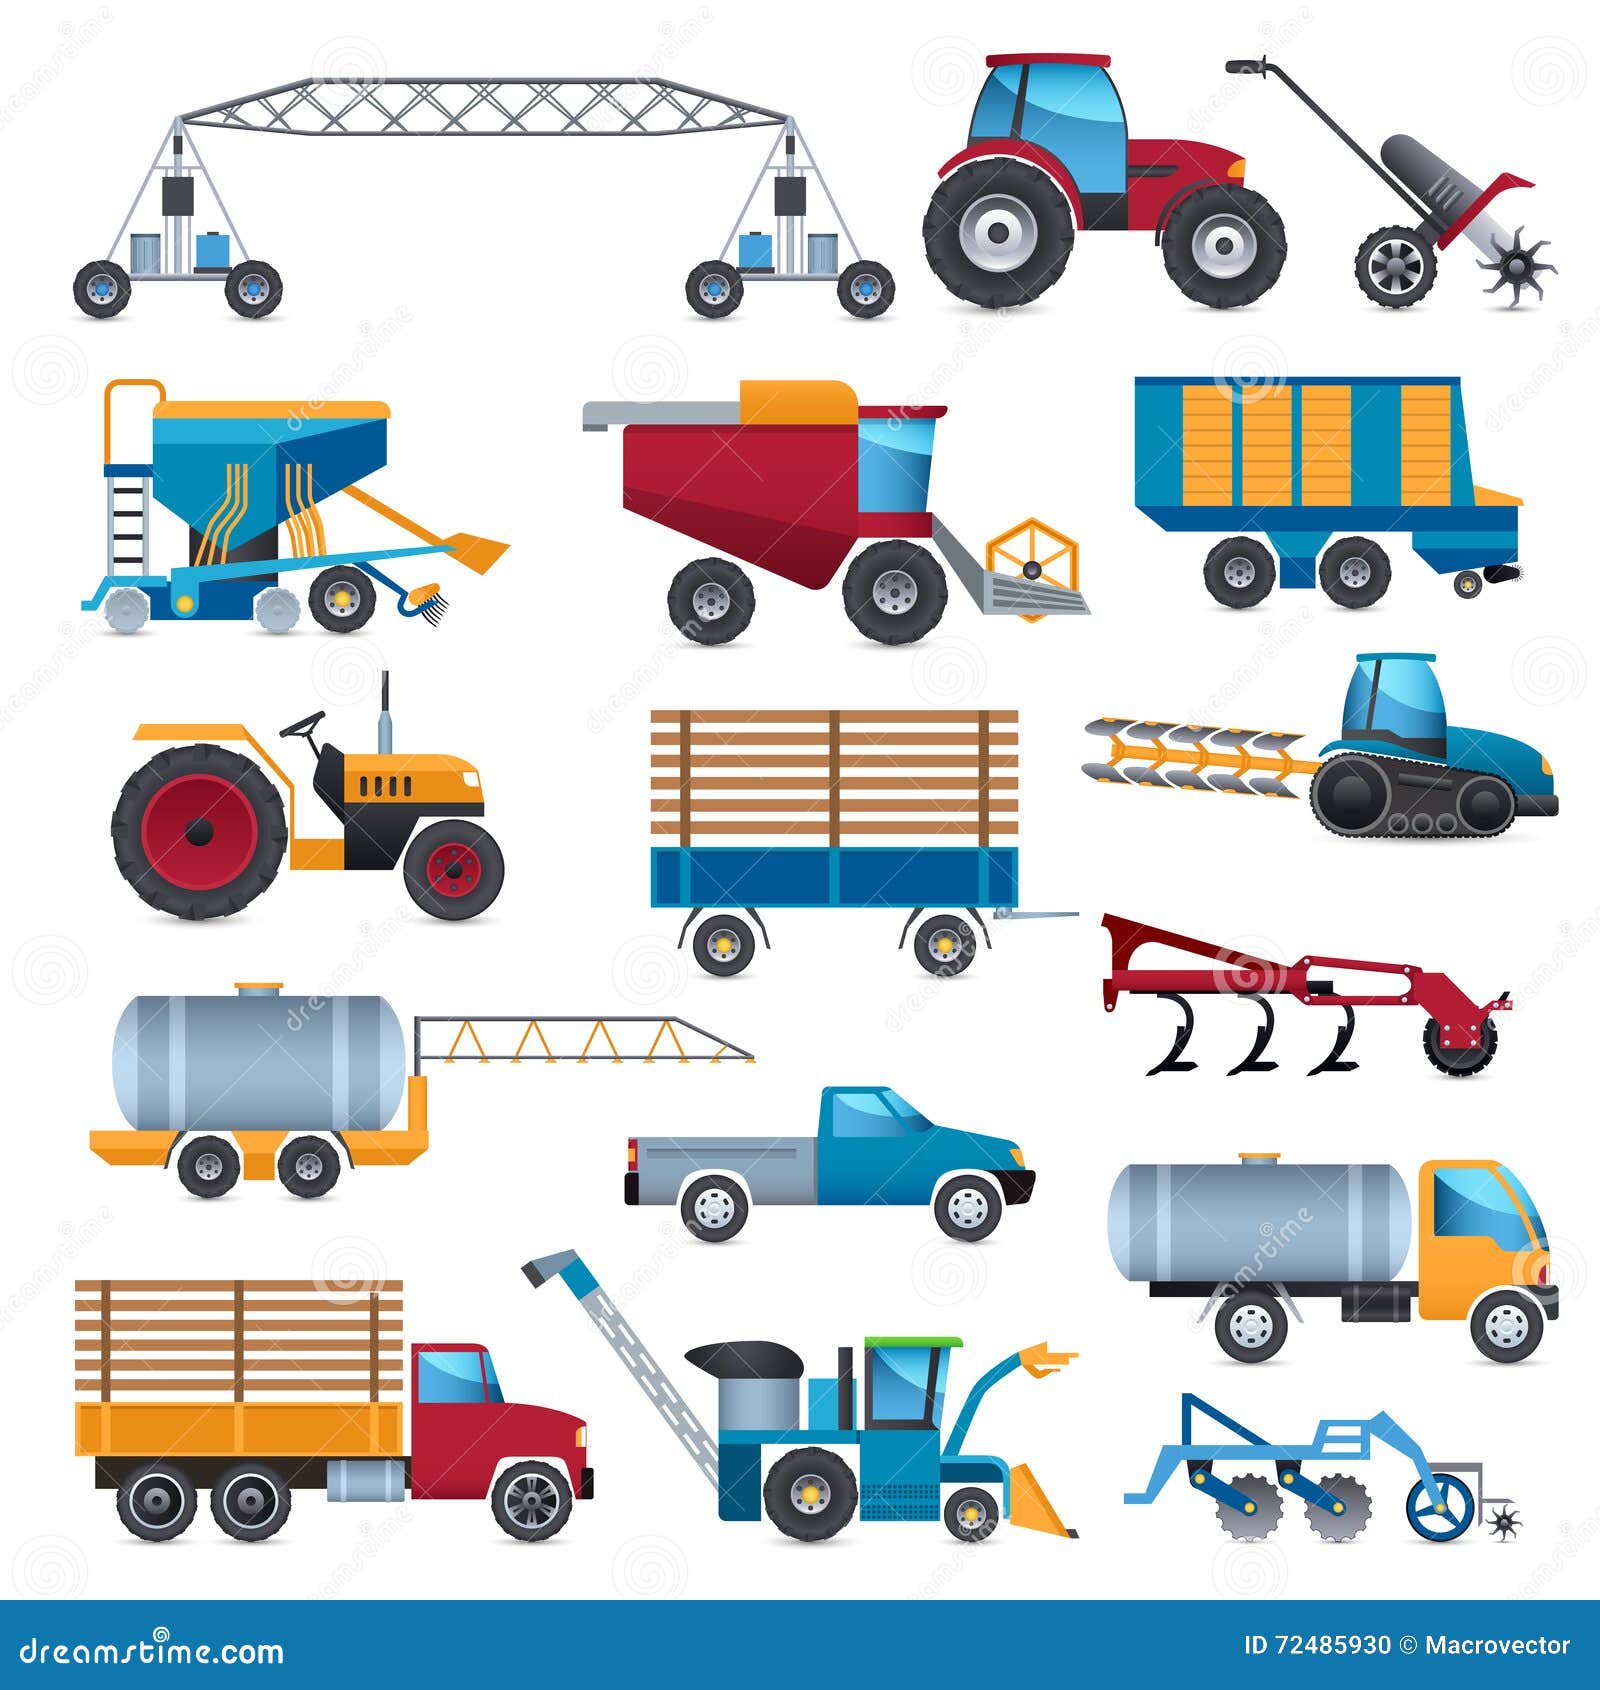 agricultural machines icons set